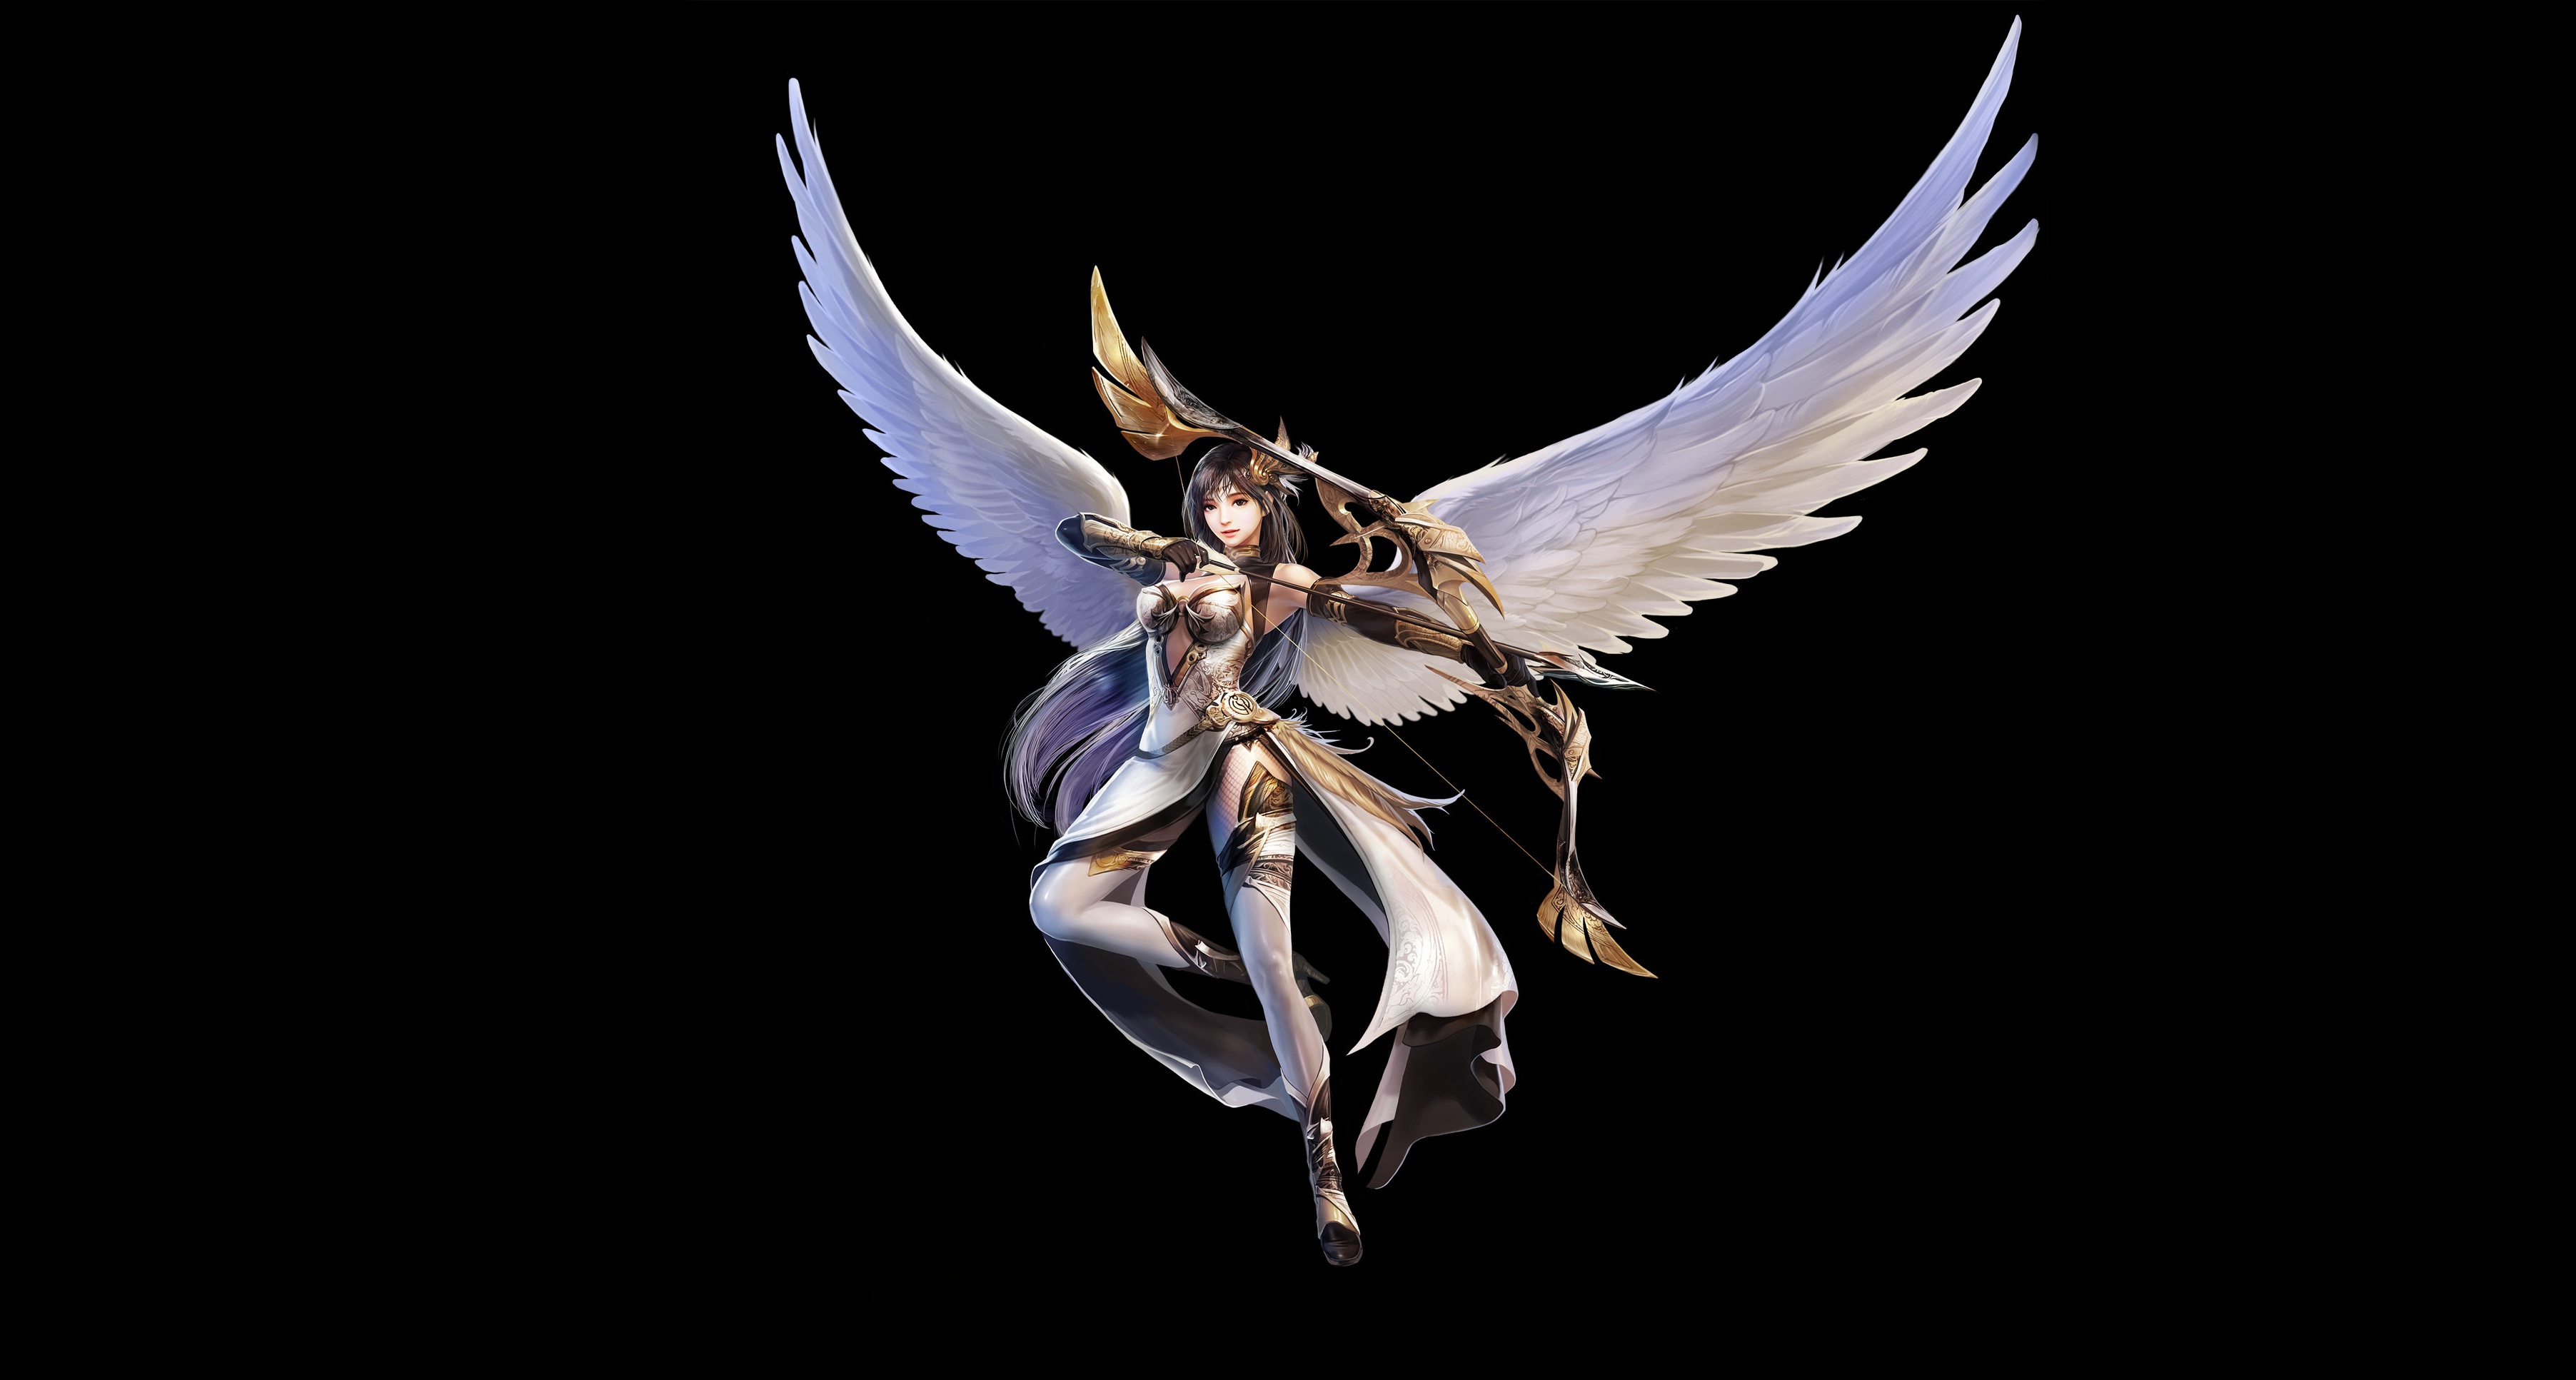 Anime 3608x1933 fantasy art wings simple background fantasy girl black background artwork anime anime girls